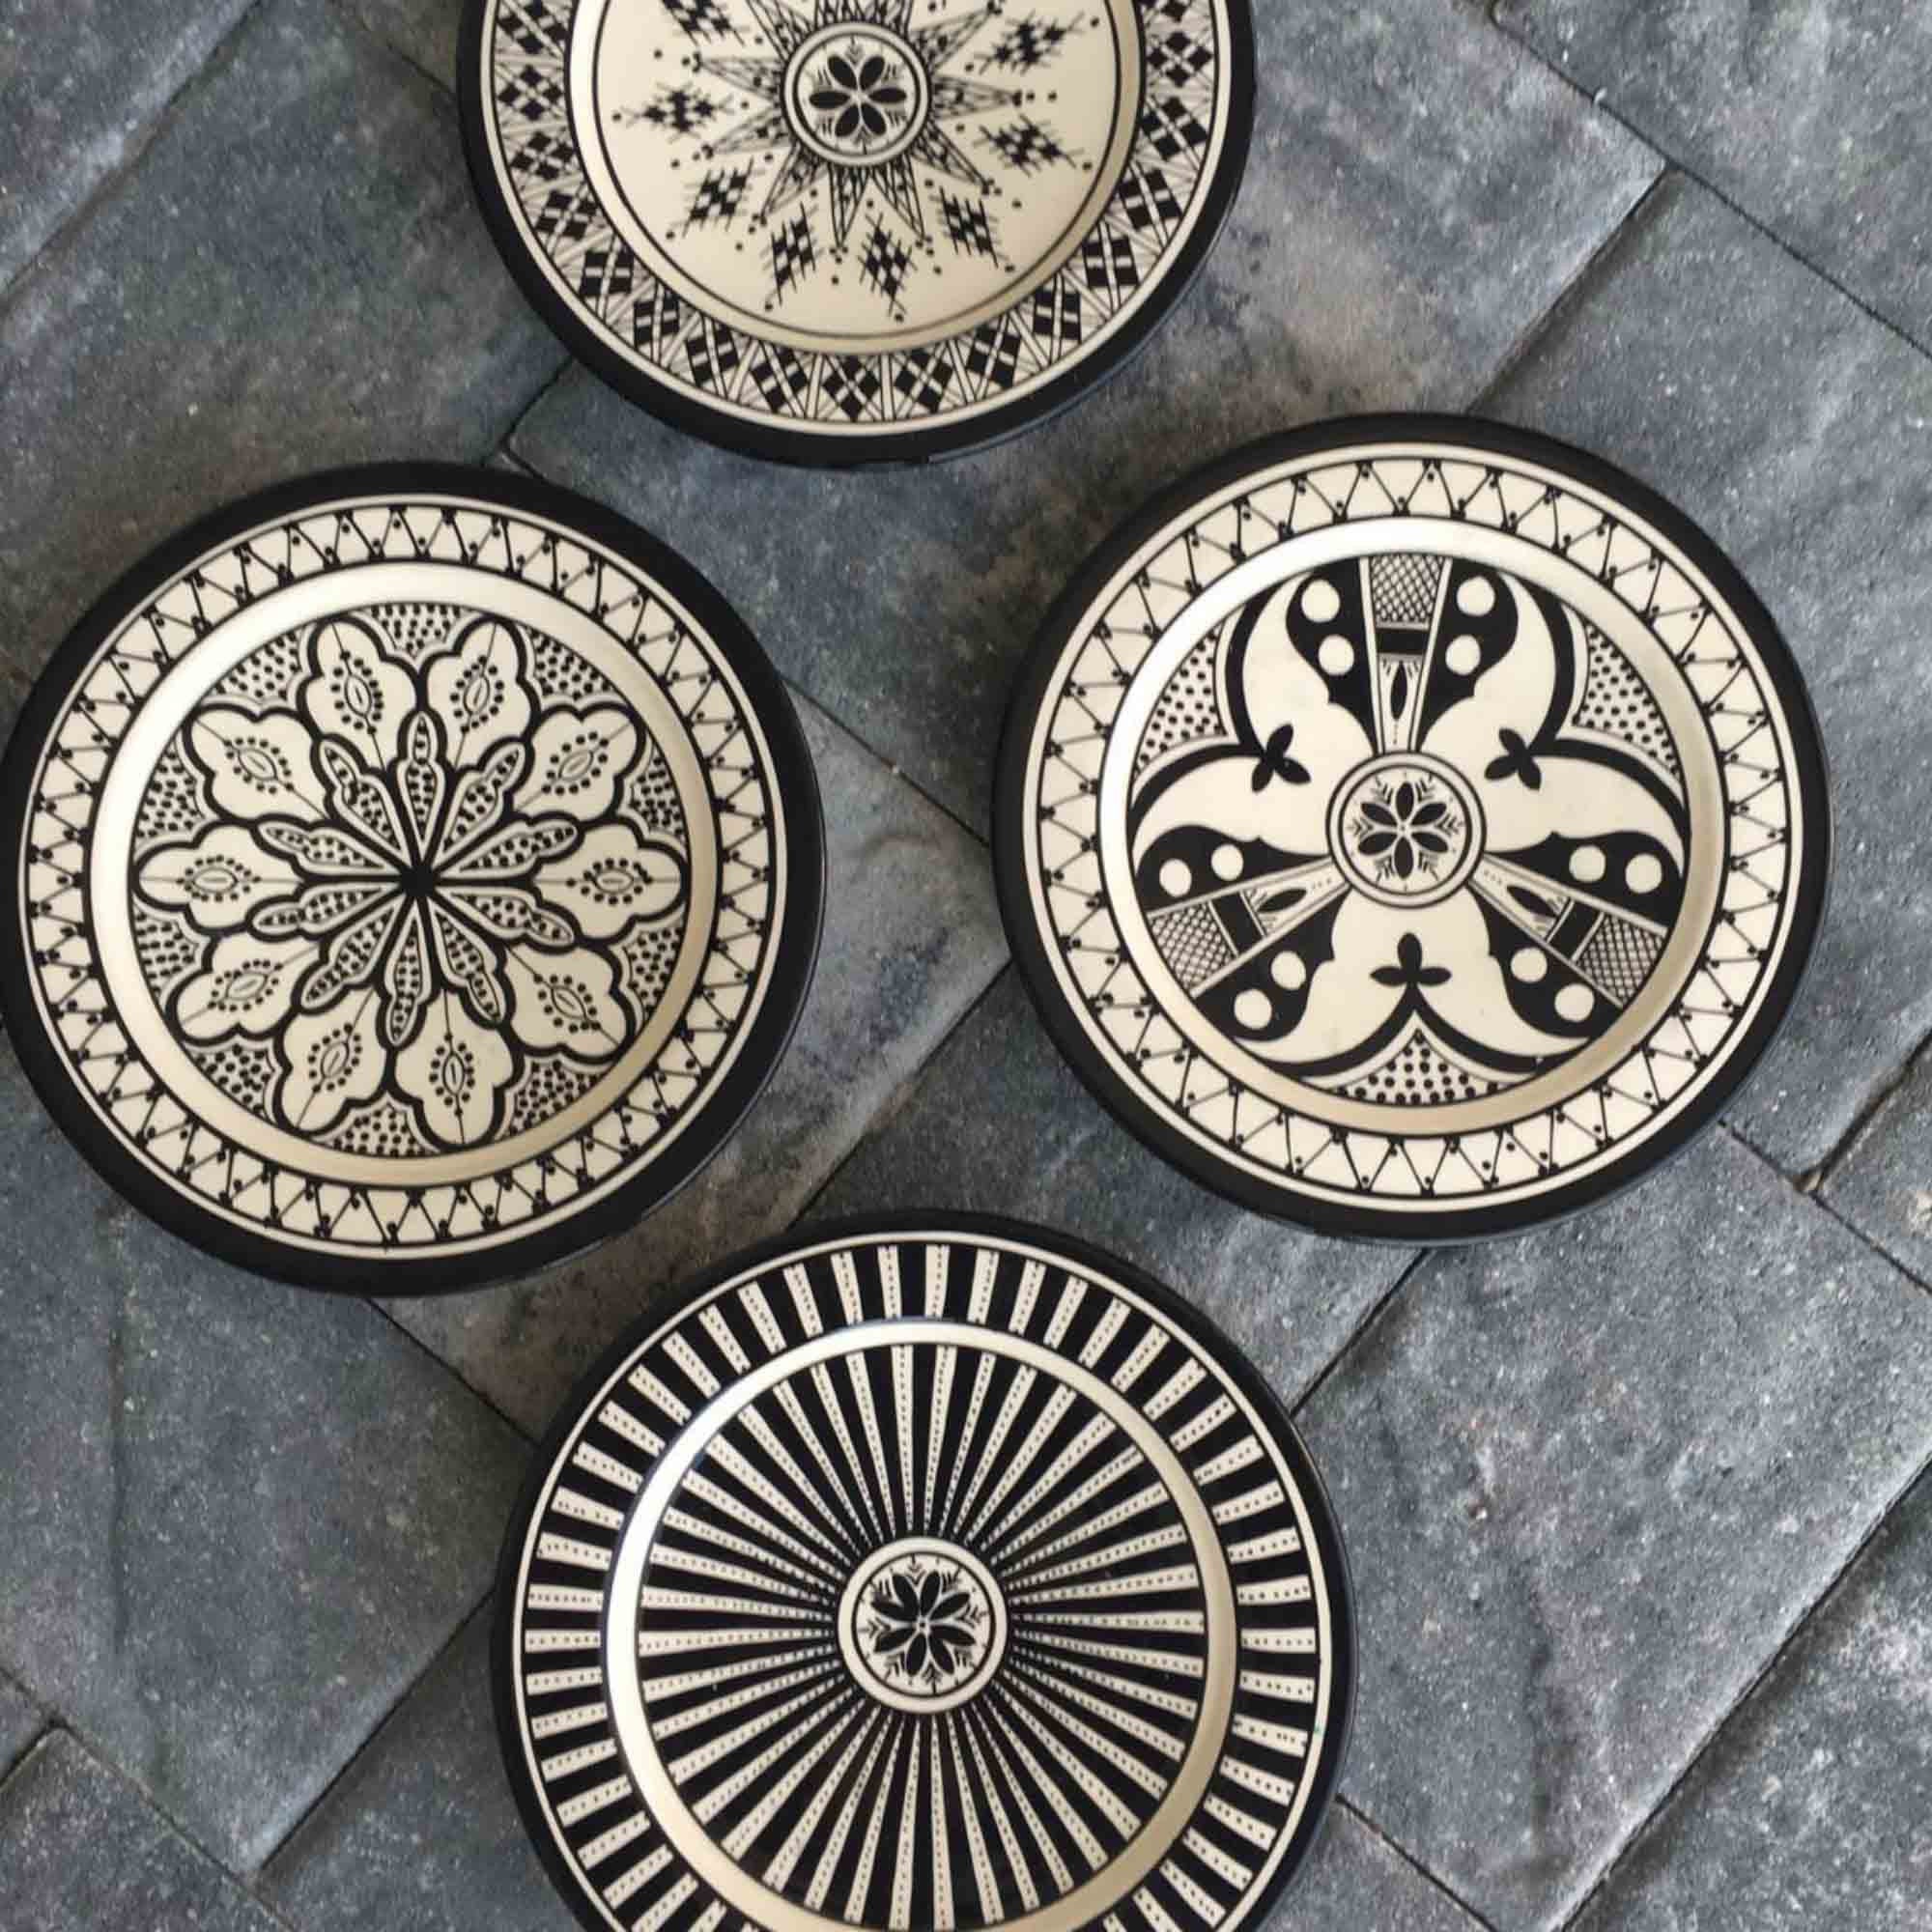 Handmade in Morocco Safi Plates from Atelier Boemia. Four different and beautifully hand-painted plates (can also be used as wall hanging-holes for wire to be inserted on backside). Available in dinner and appetizer sizes. Handmade in Safi, Morocco. Dishwasher and microwave safe. Measurements Dinner: 25 cm (10") diameter .Appetizer: 17 cm (7") diameter.